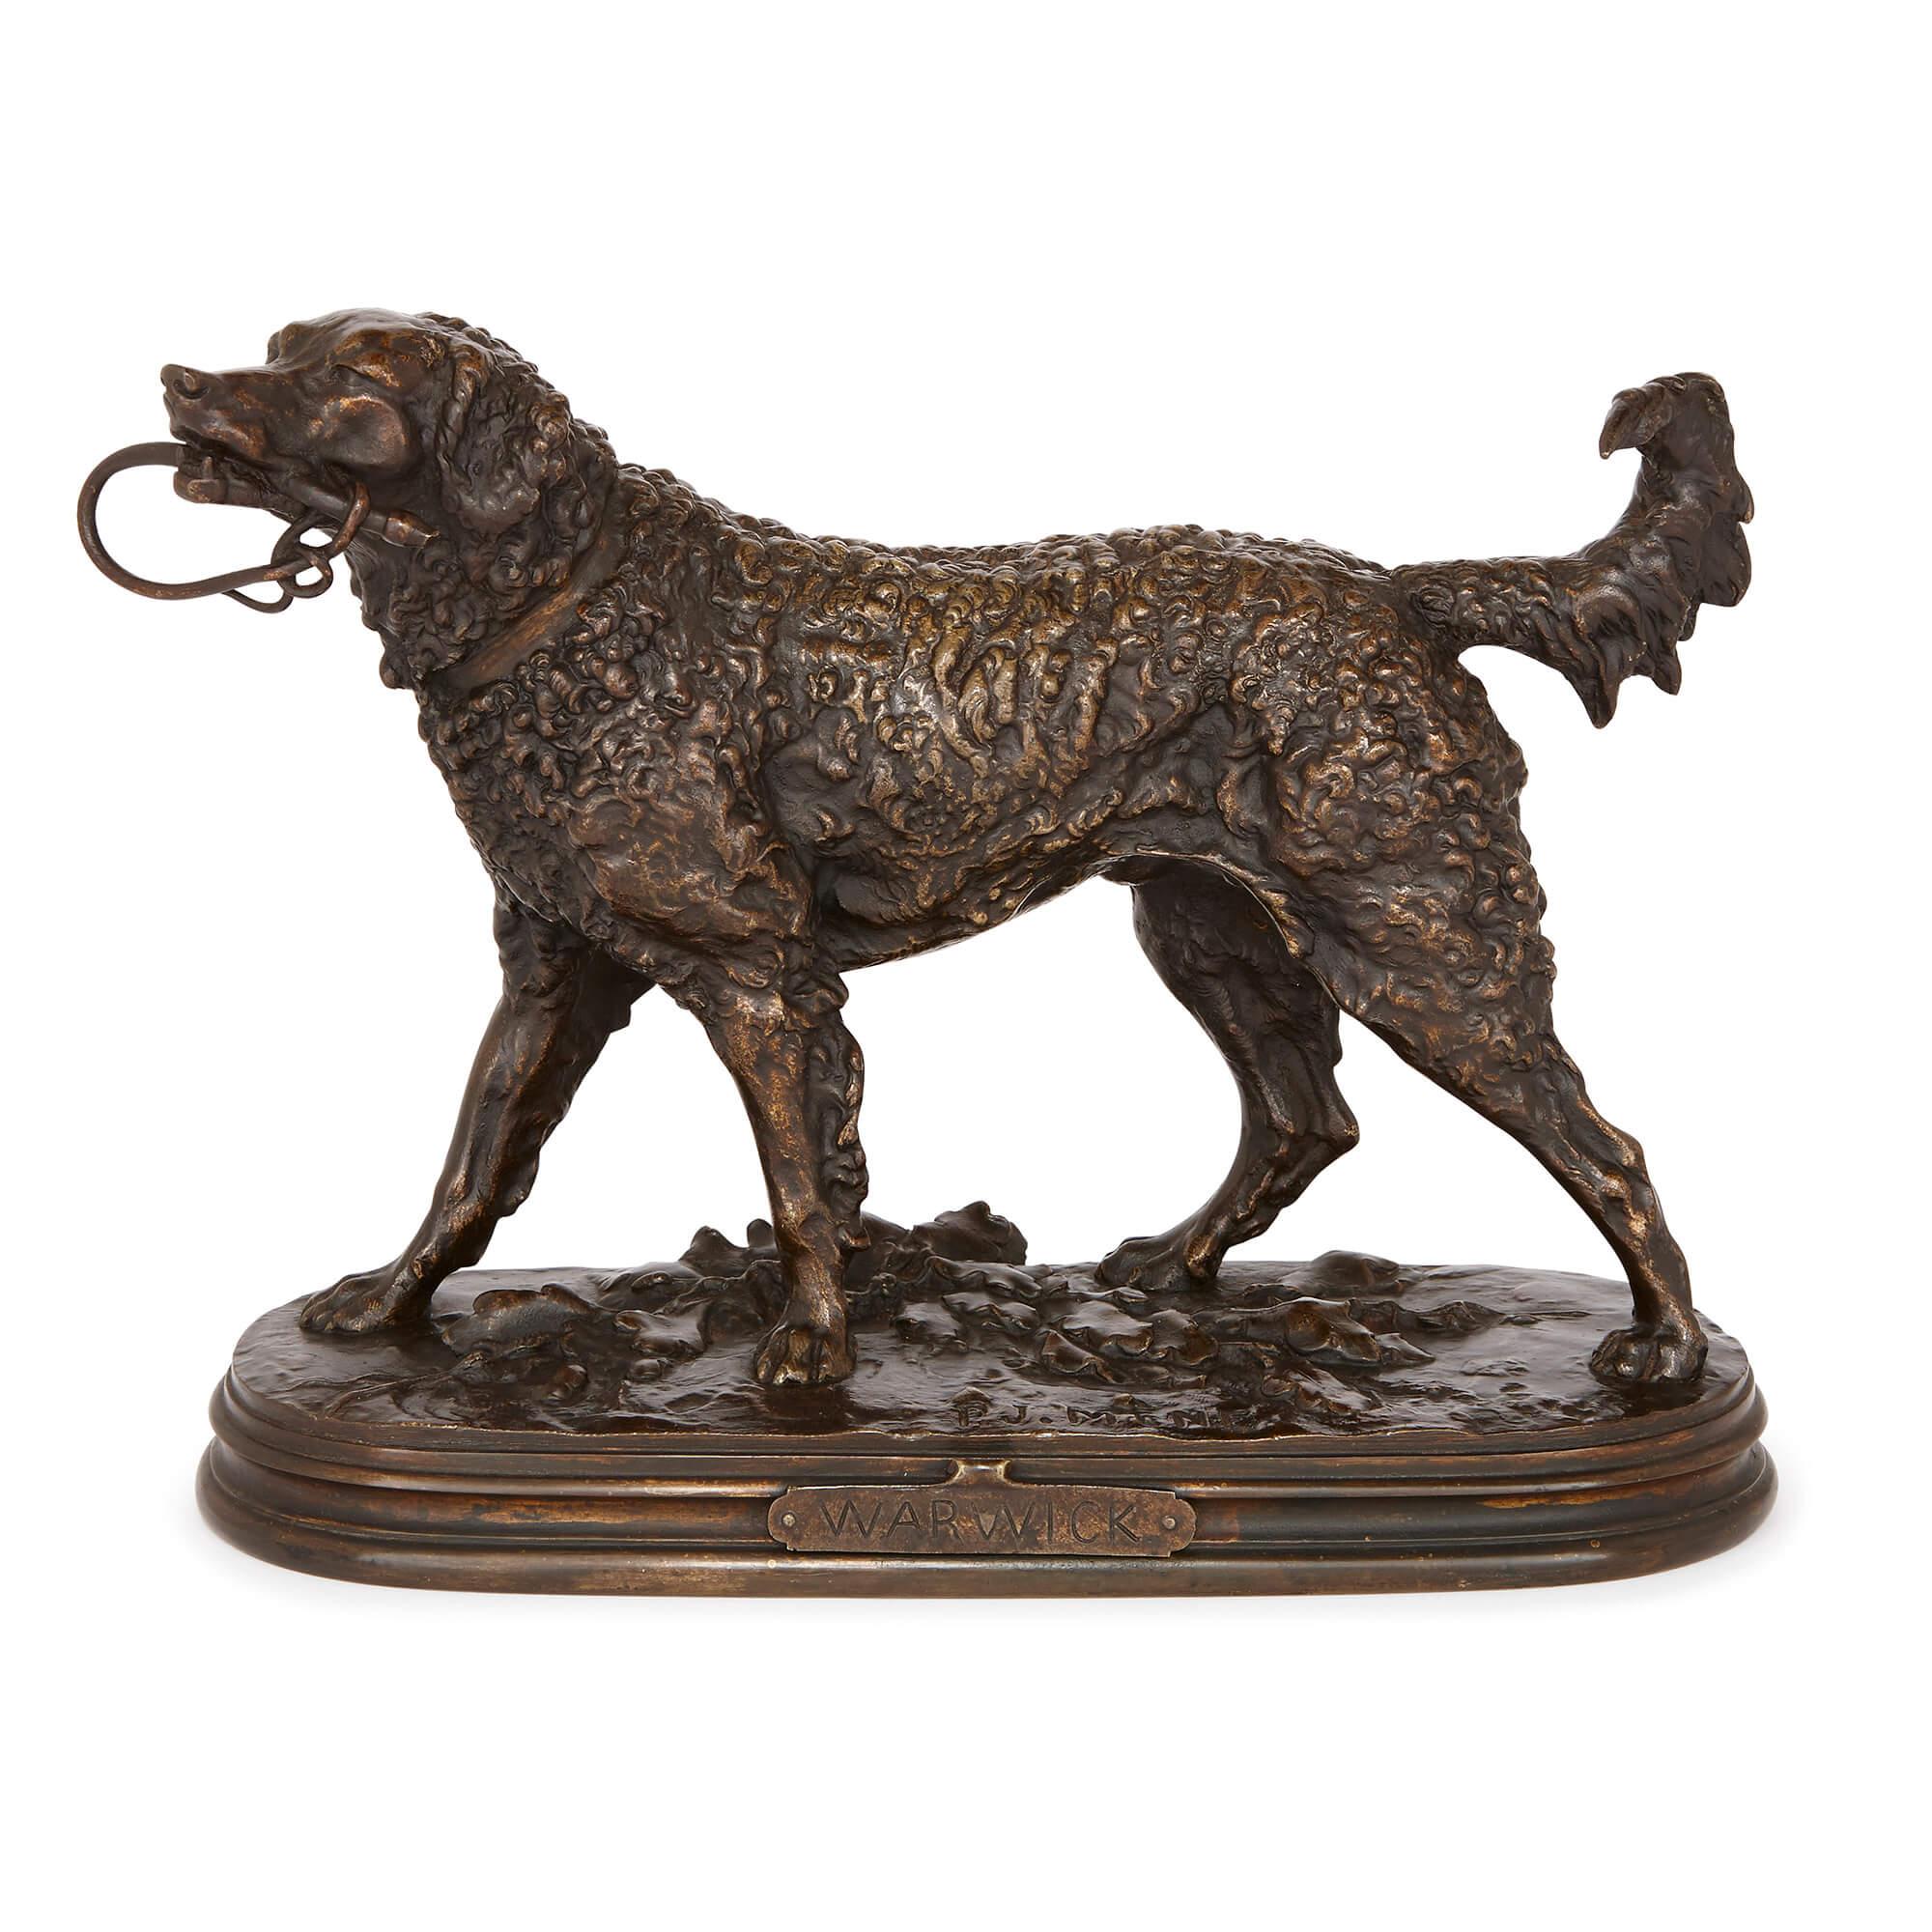 Pierre-Jules Mene (1810-1879) was one of the foremost animalier sculptors of the 19th Century, and achieved high distinction in the art of making small bronze figures of domestic animals for the expanding French market. His models were widely